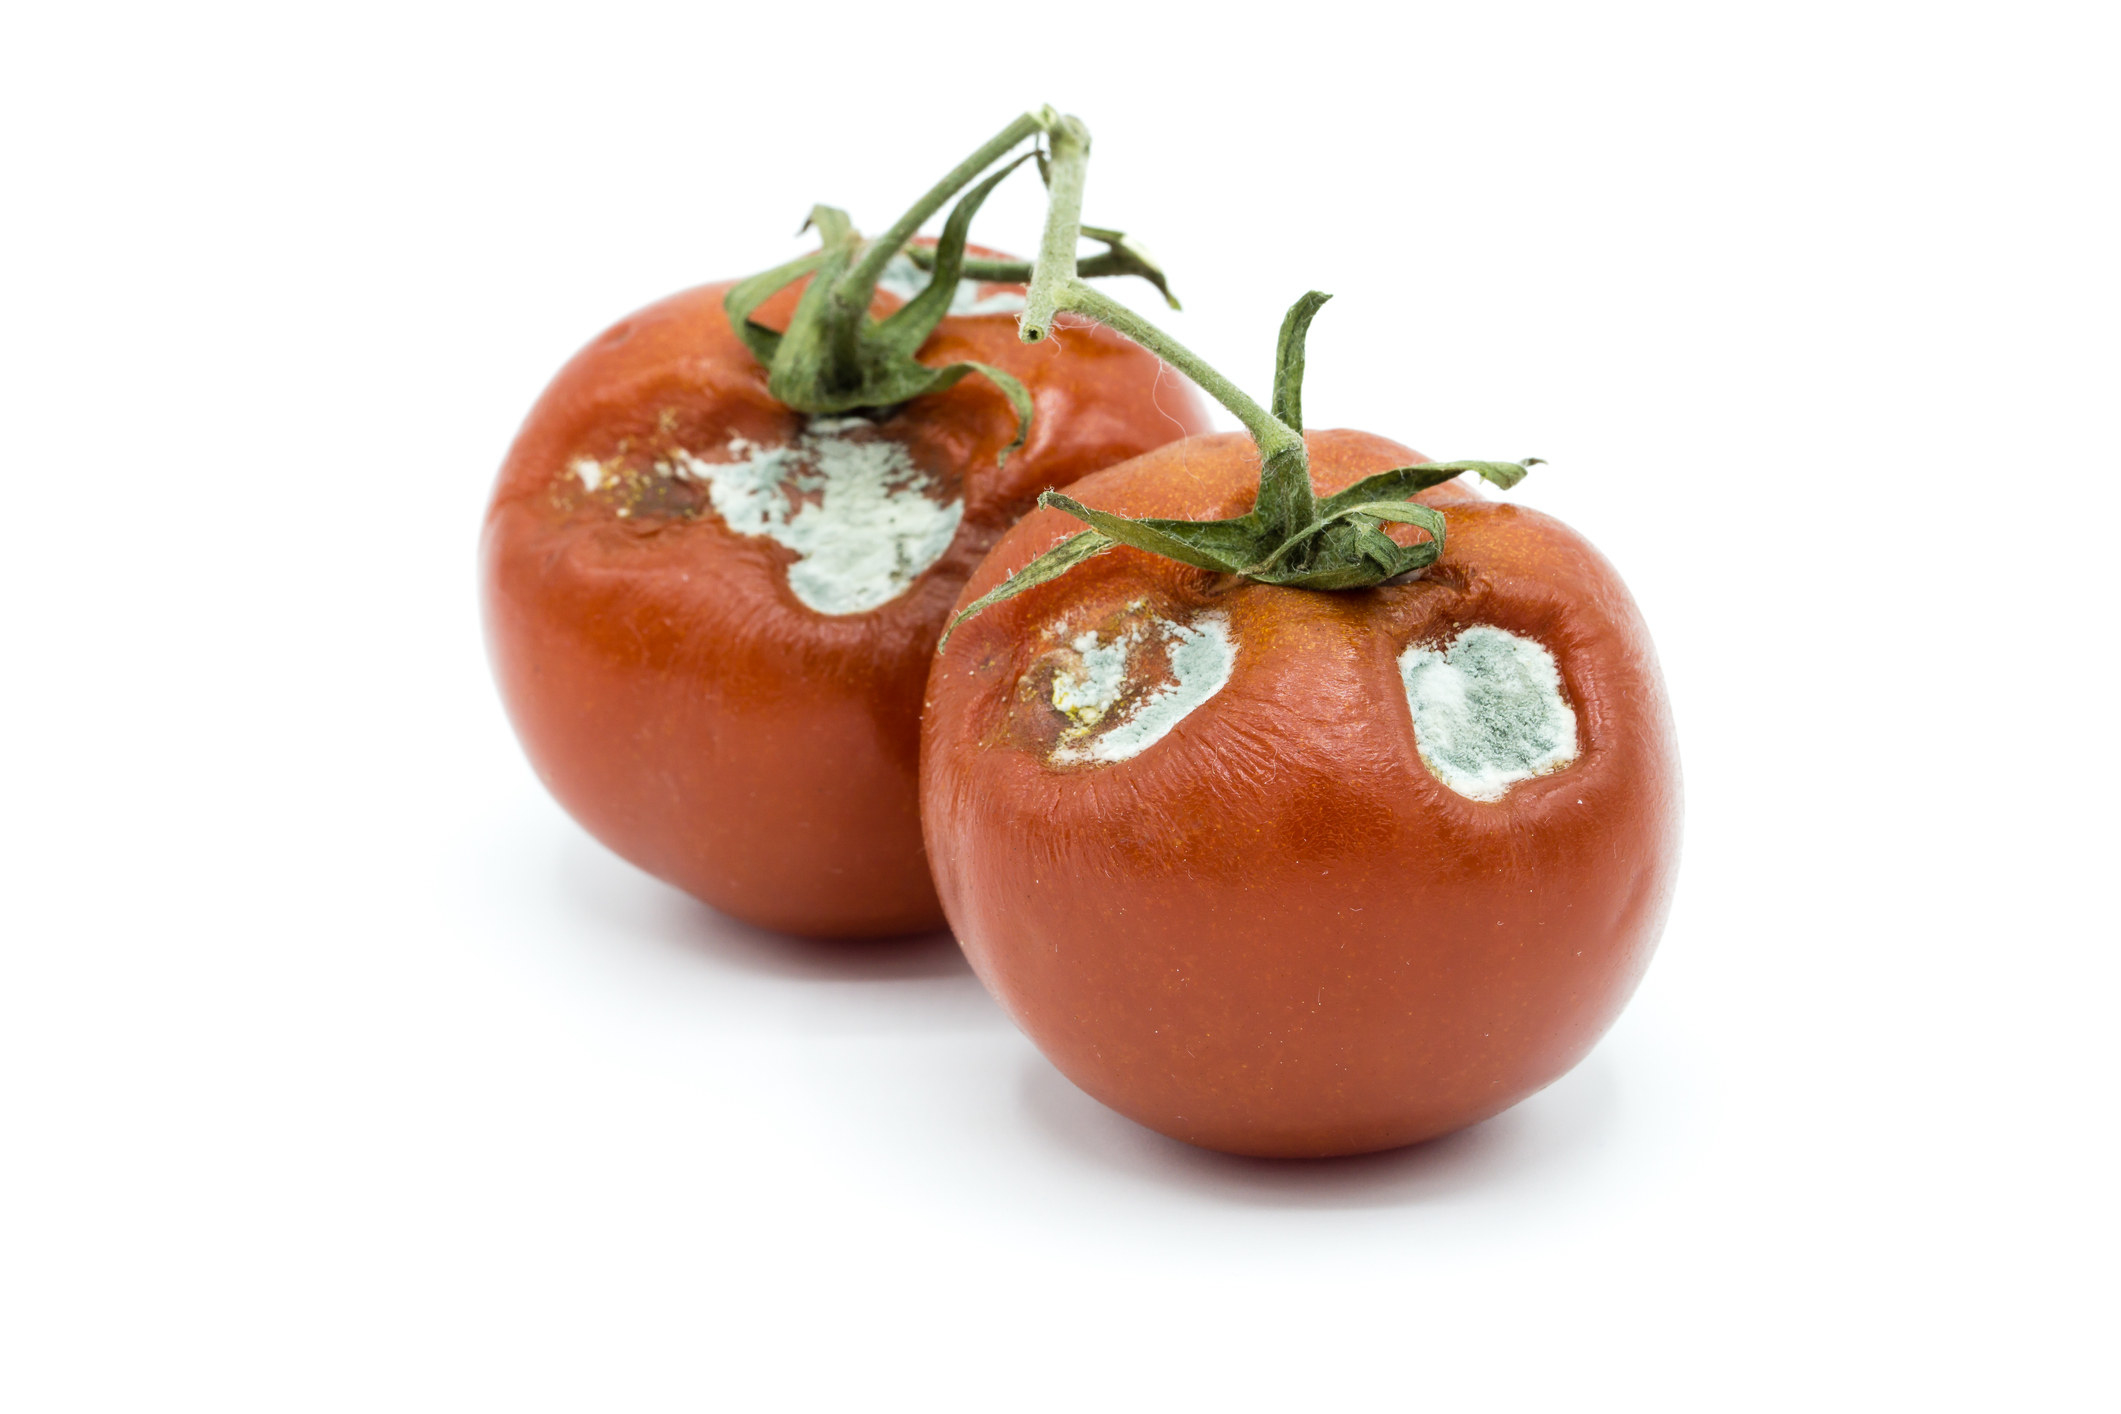 Two tomatoes on the vine with mold